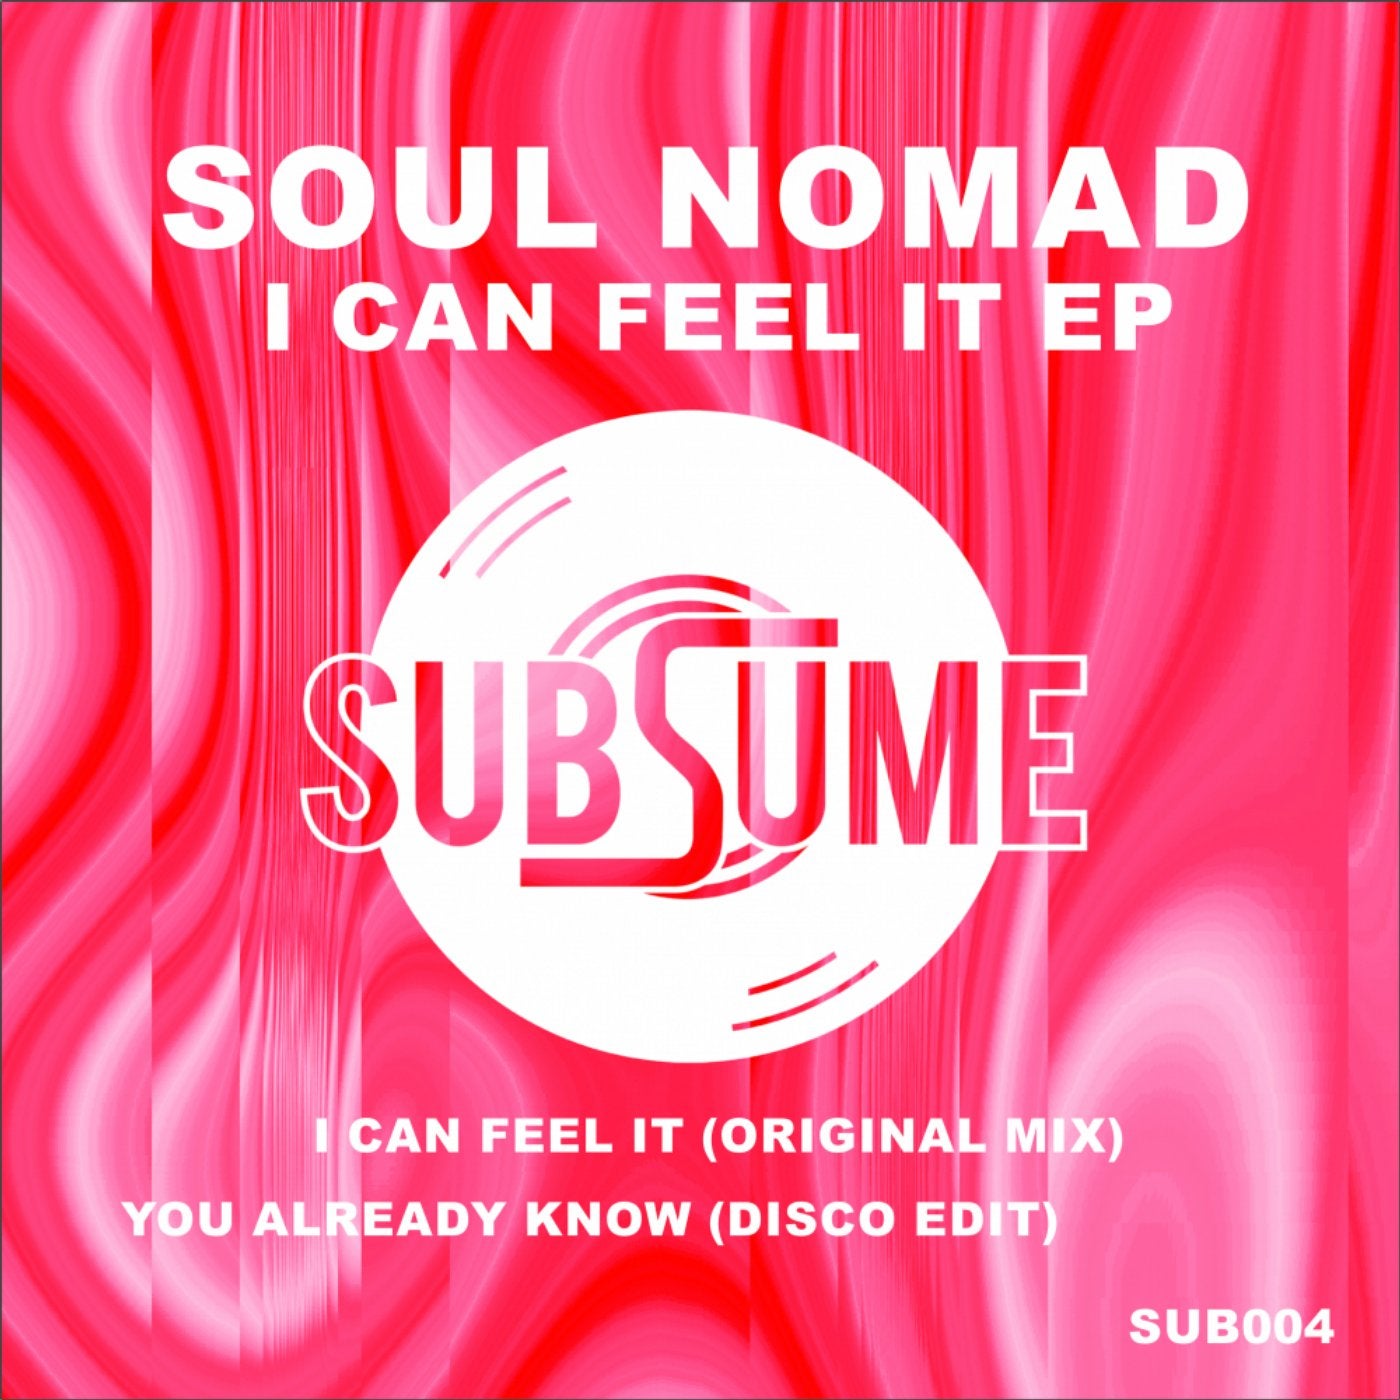 I Can Feel It EP